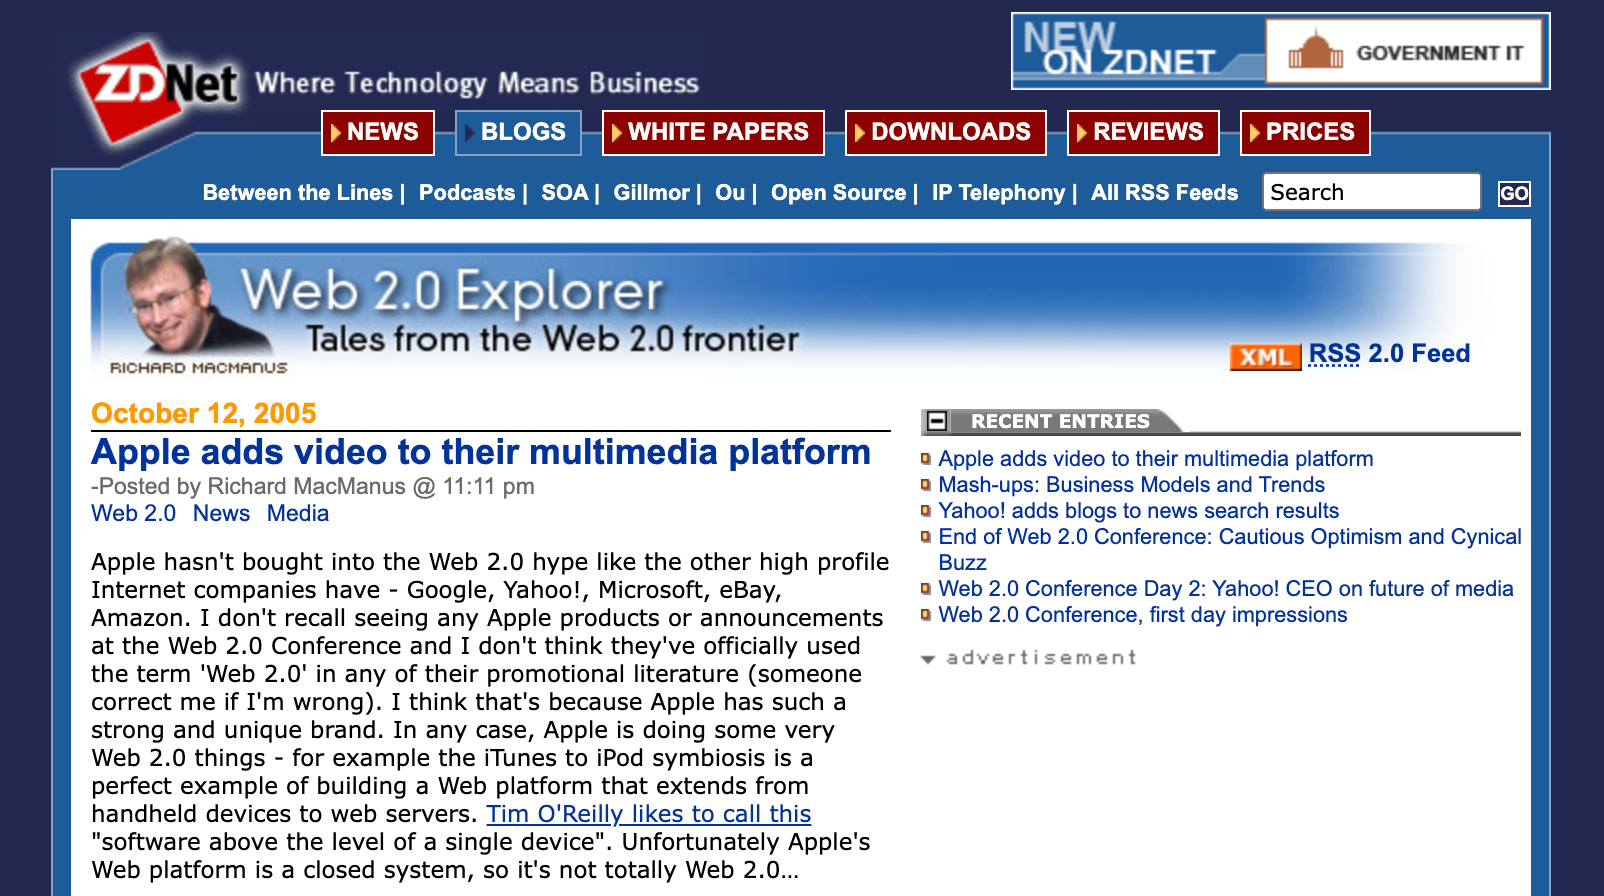 My ZDNet blog, which I started at the end of August 2005.